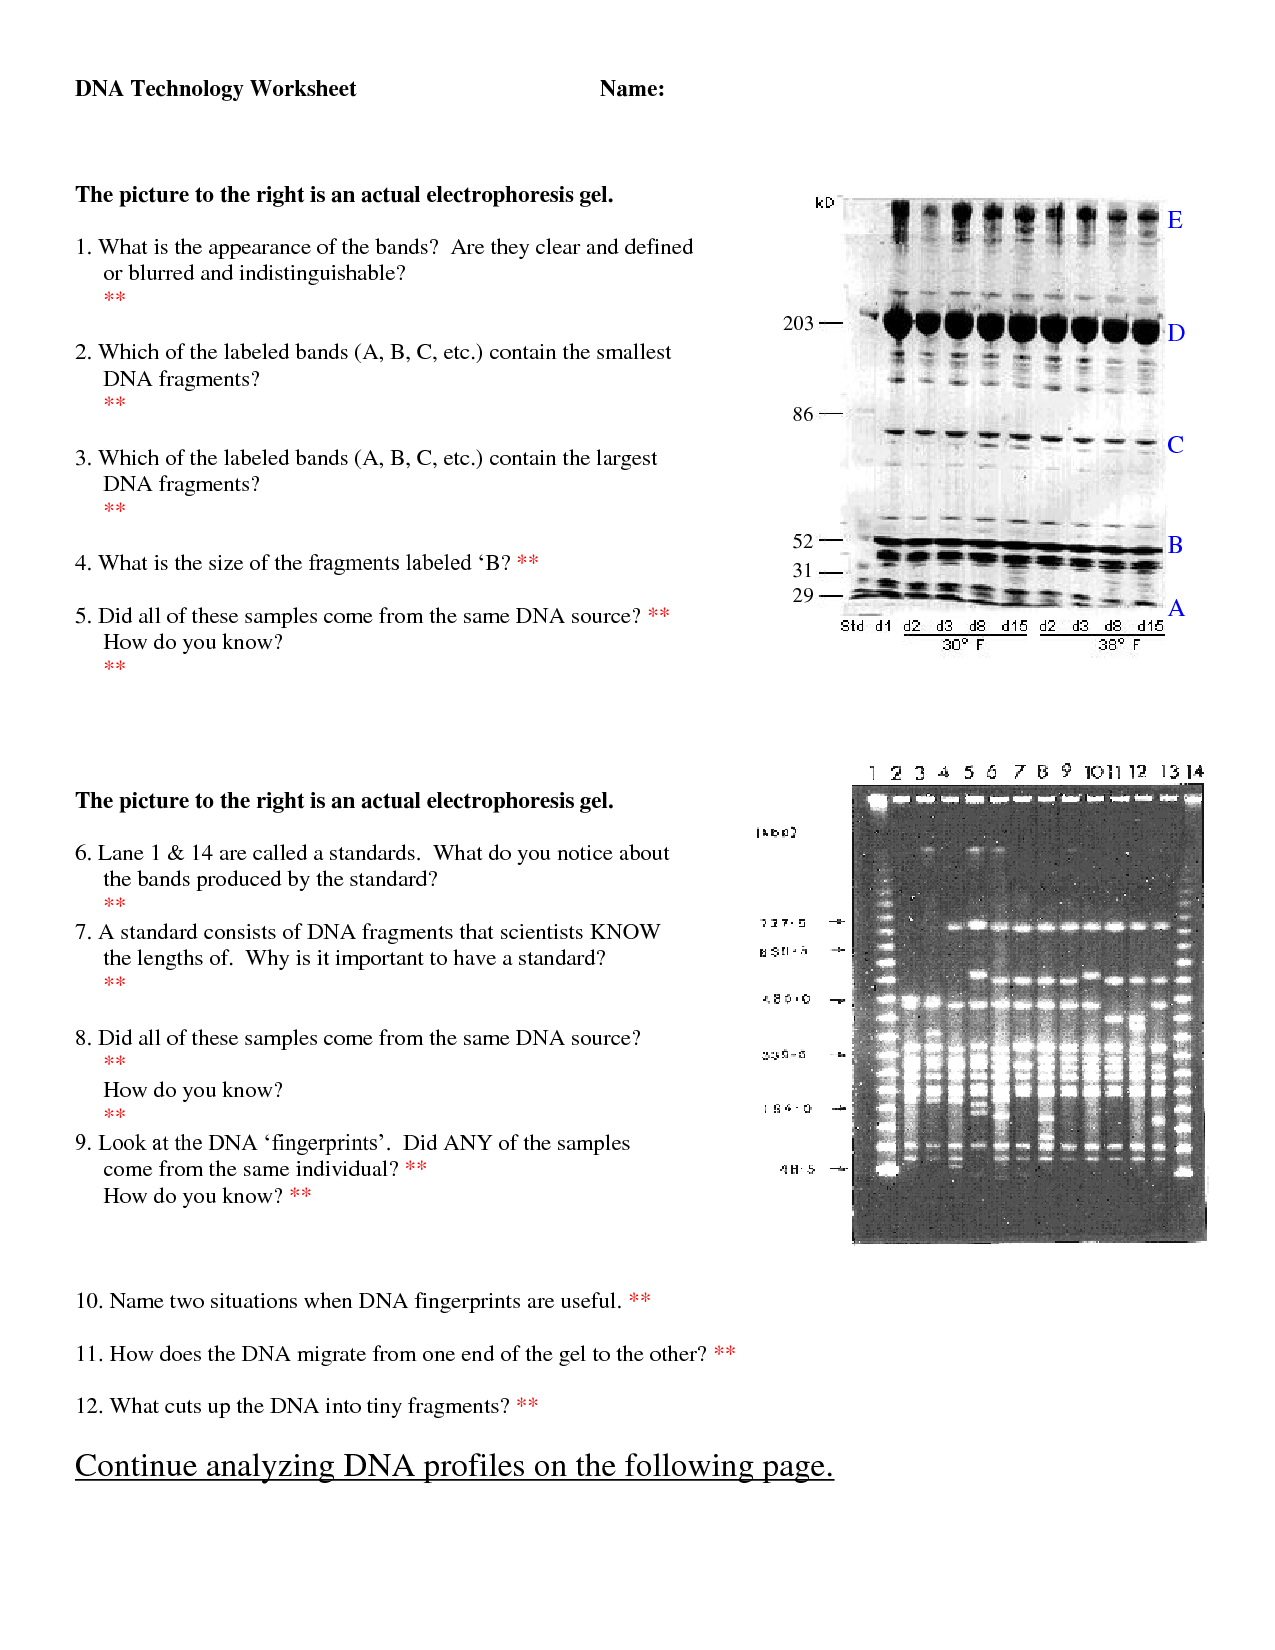 DNA Technology Worksheet Answers Image